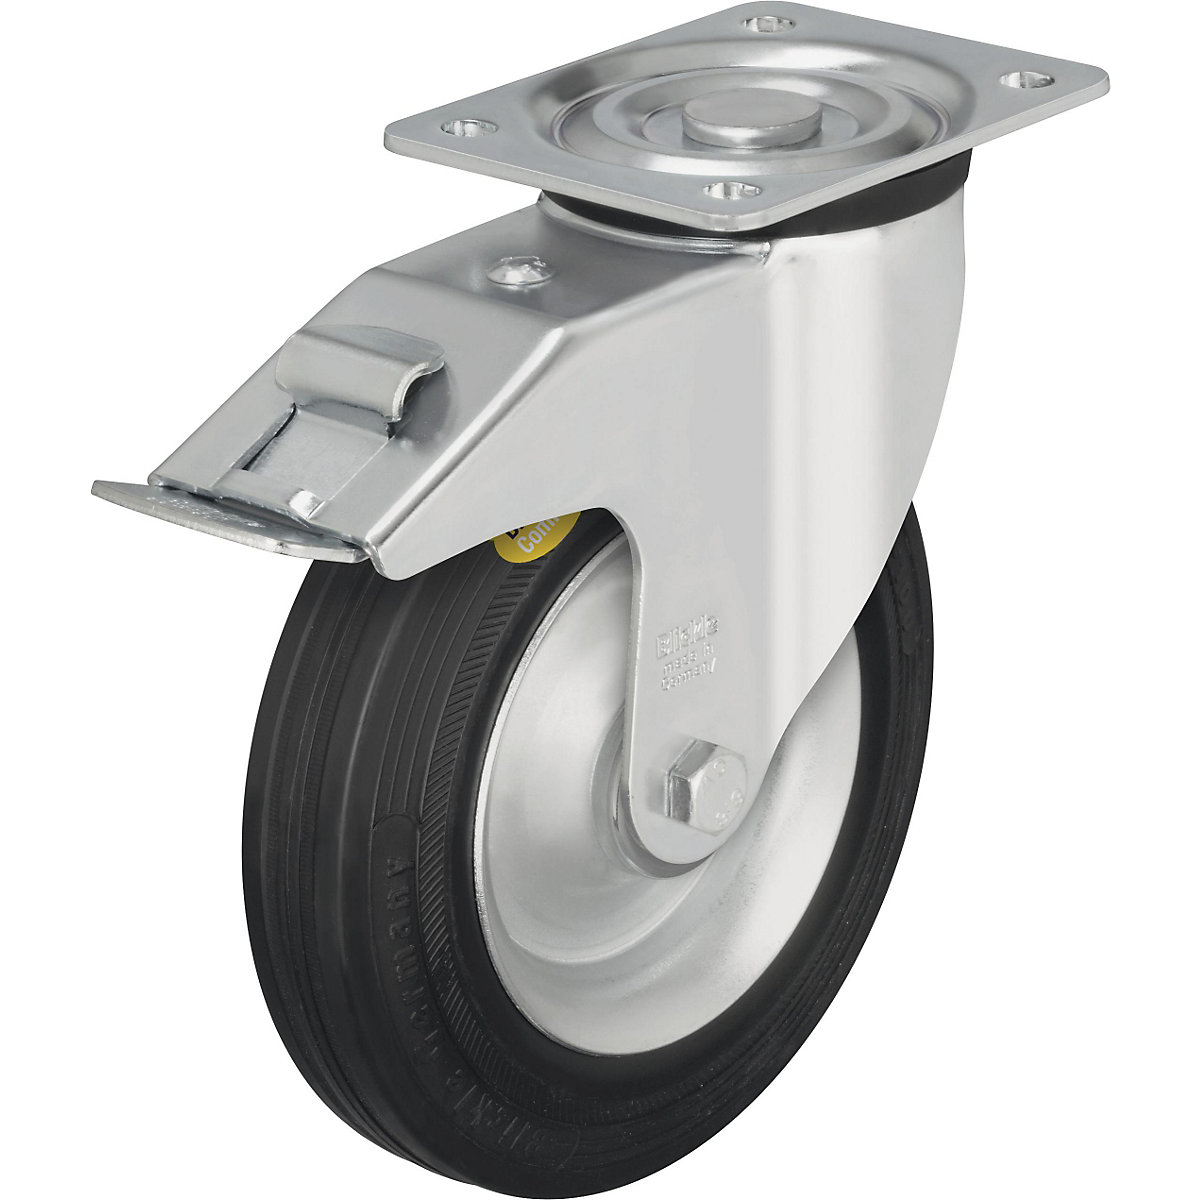 Two component solid rubber tyre, wheel Ø x width 125 x 37.5 mm, swivel castor with double stop-5